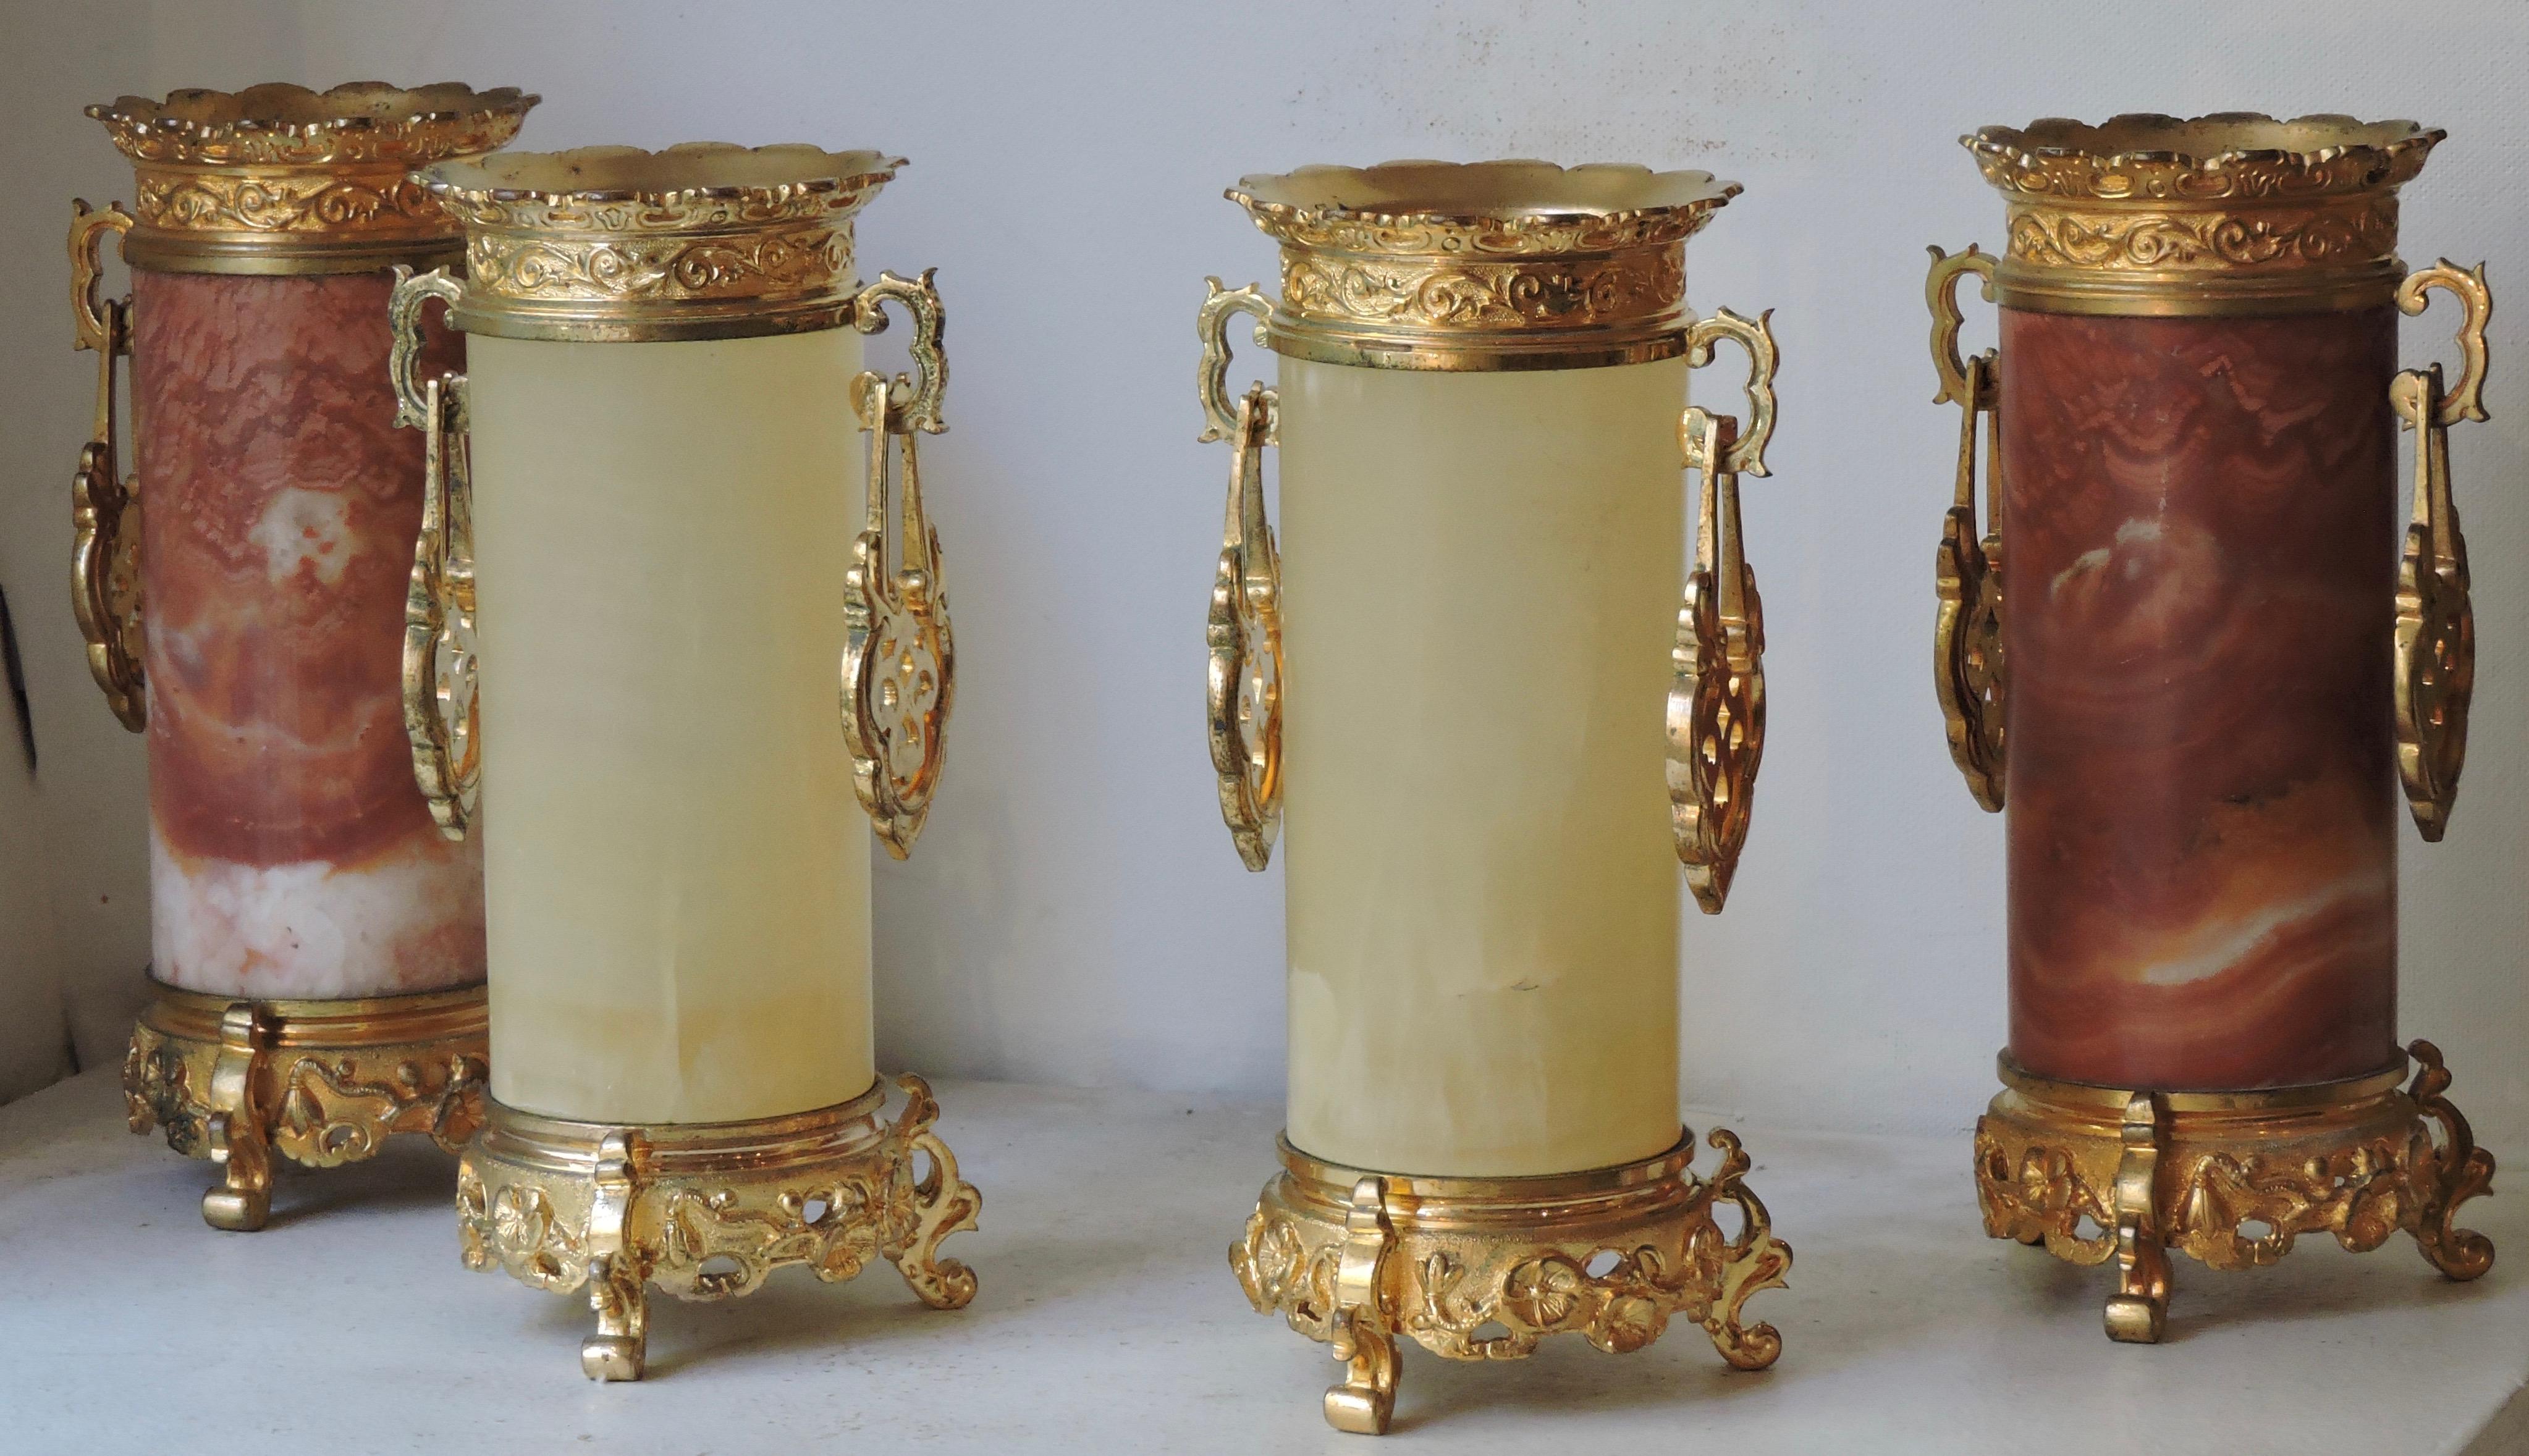 Set of 4 Japonisme Marble, Onyx and Ormolu Vases in the Style of Edouard Lièvre (Vergoldet)